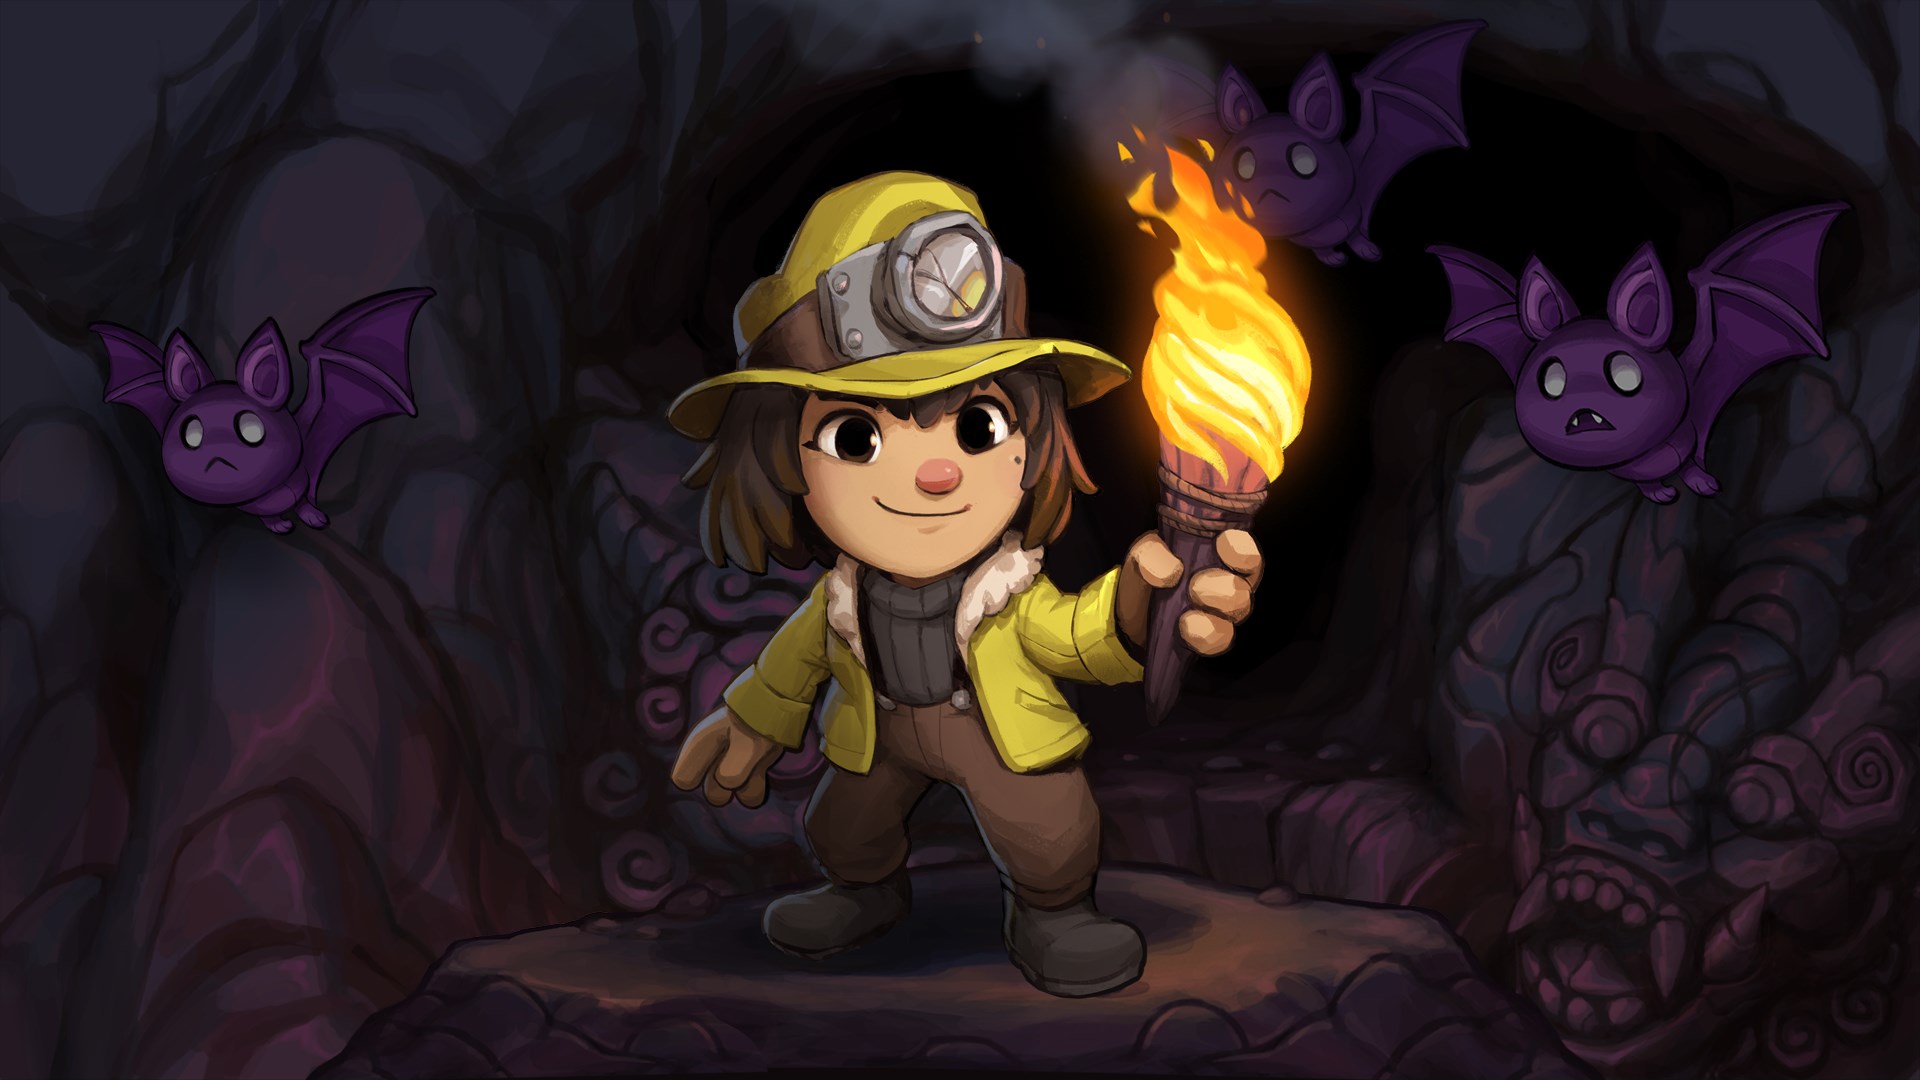 Spelunky 2 Is Now Available For PC, Xbox One, And Xbox Series X|S
(Xbox Game Pass)